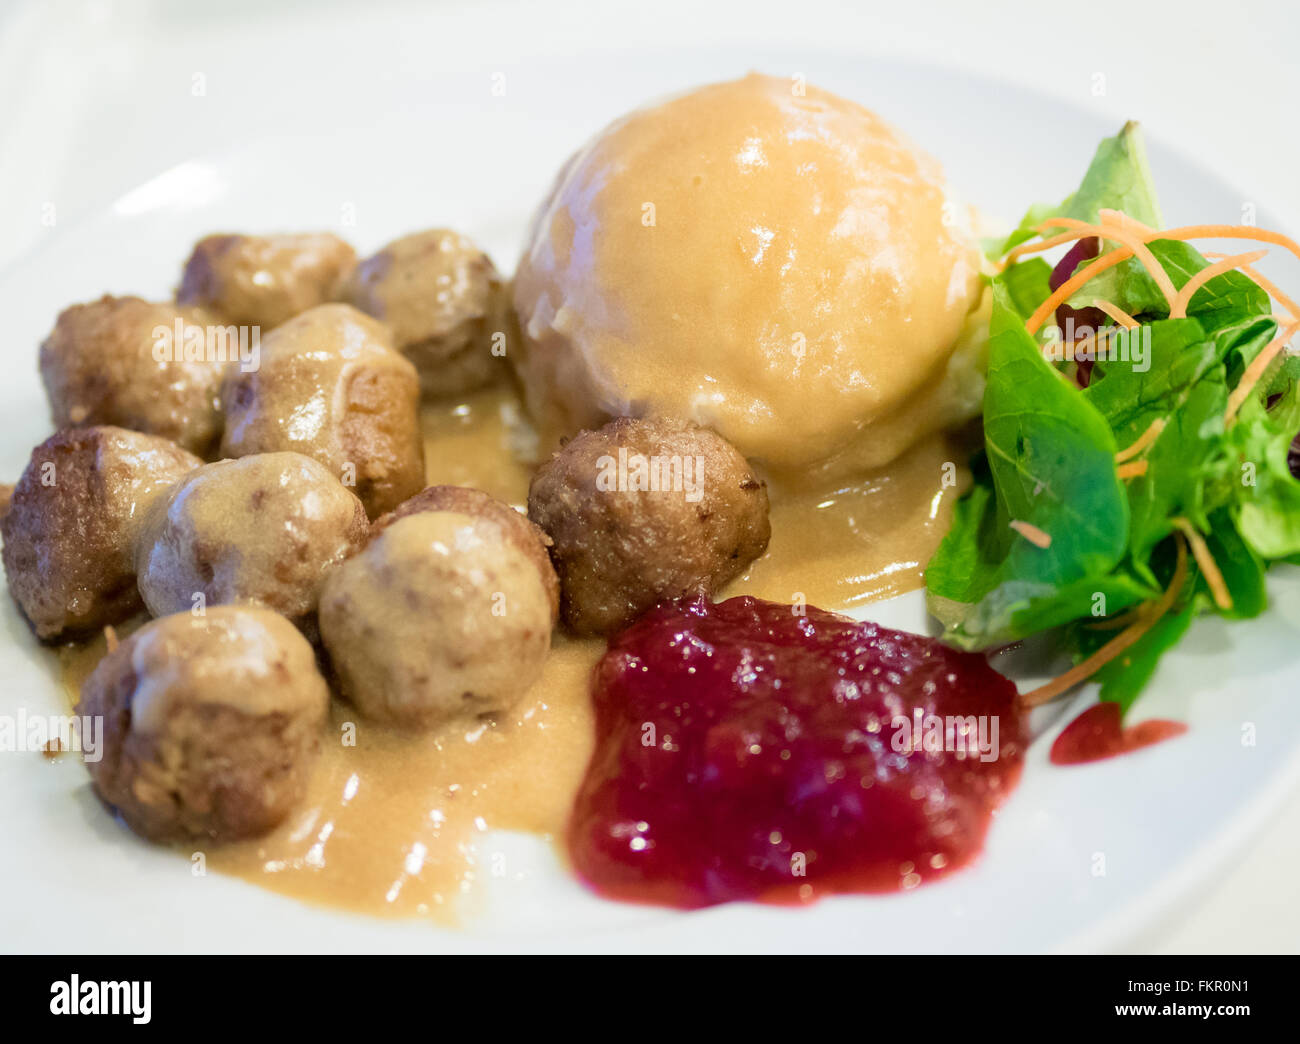 A plate of IKEA meatballs, mashed potatoes, cream gravy, green salad and lingonberry sauce. Stock Photo